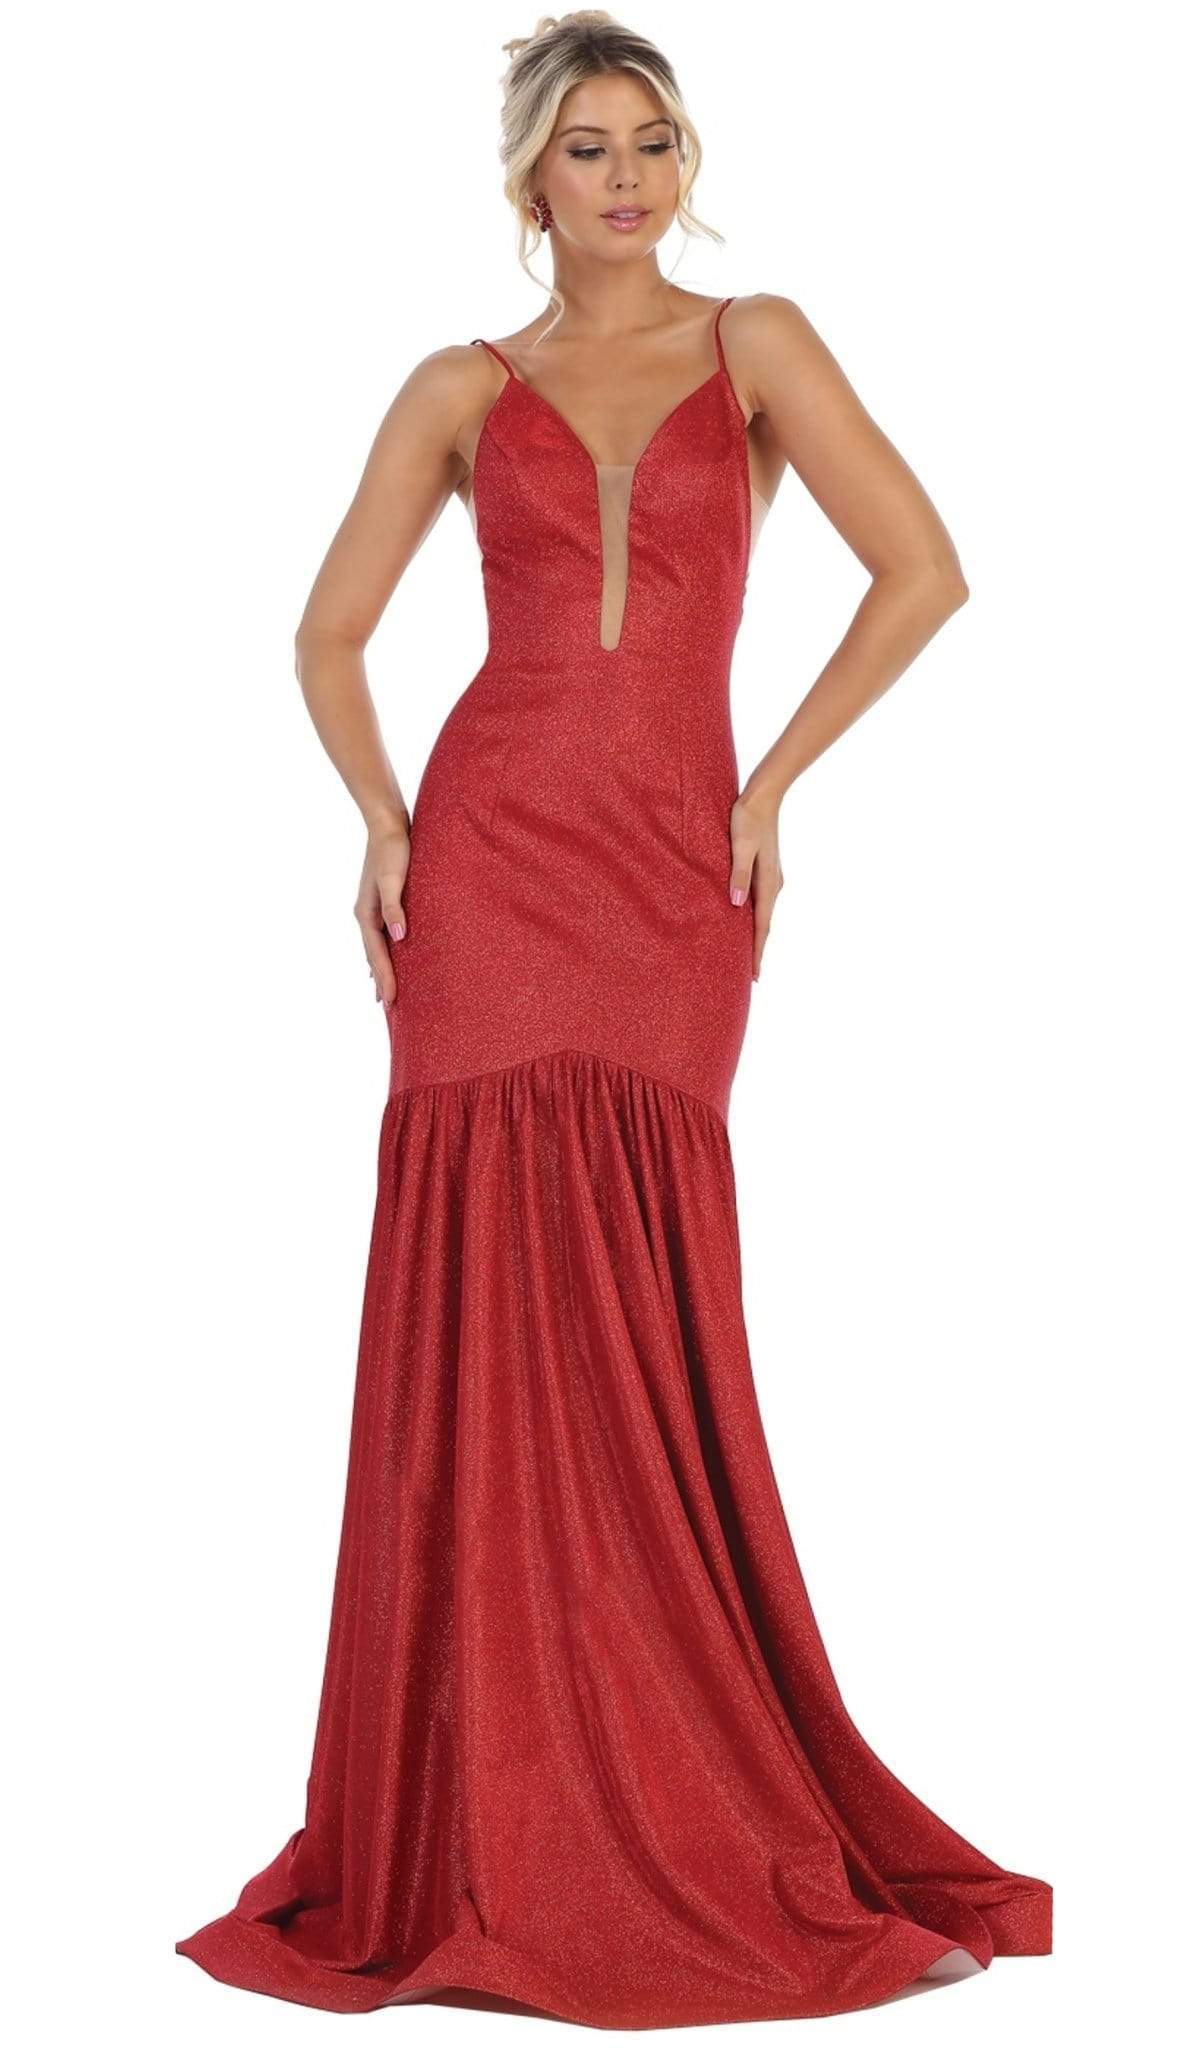 May Queen - RQ7725 Plunging V-Neck Fitted Trumpet Gown